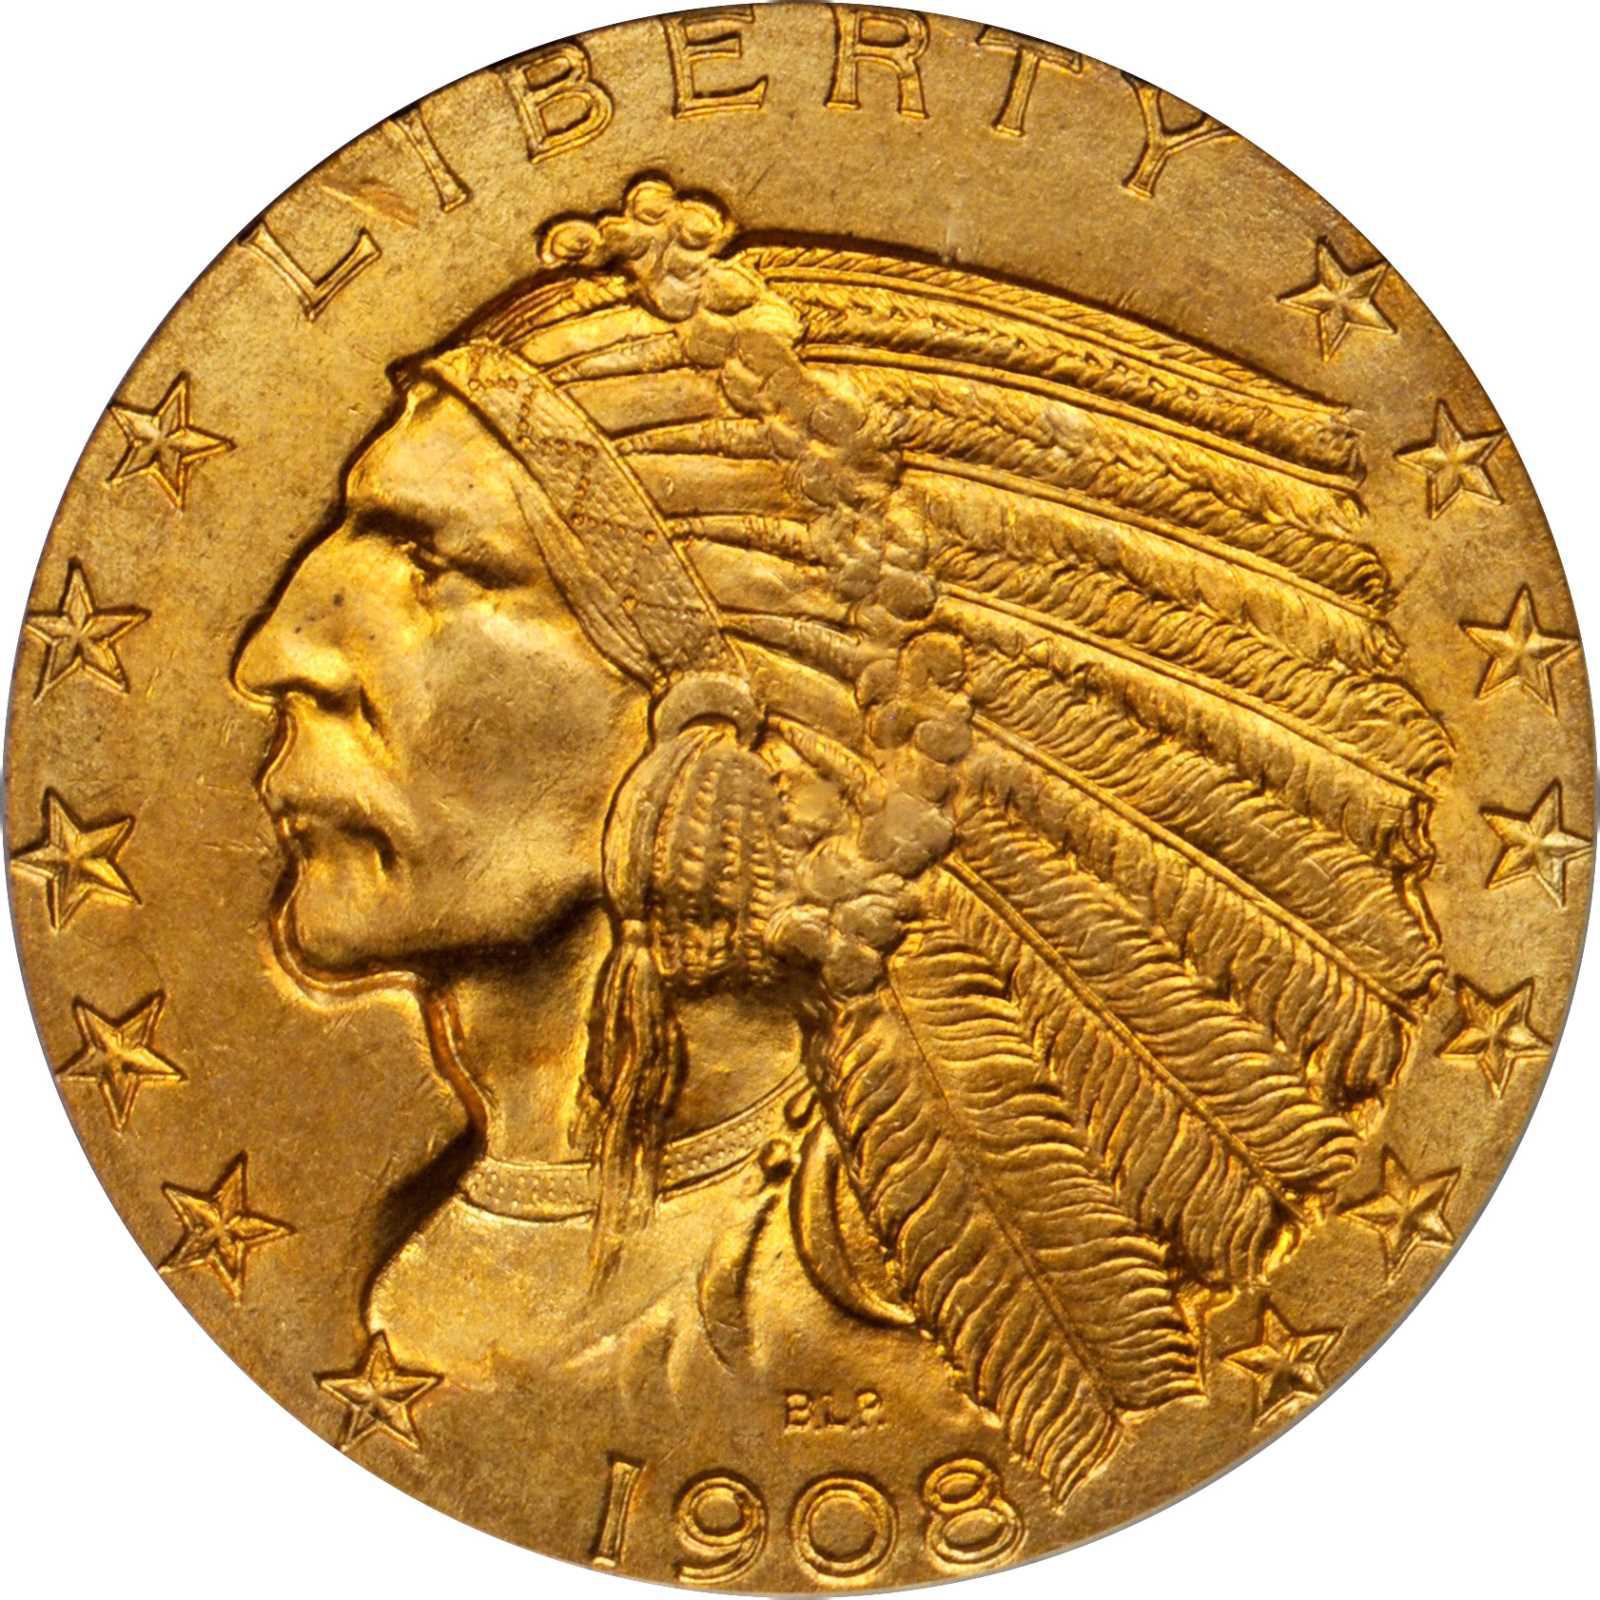 FREE SHIPPING 1908 Indian Half Eagle Coin 24-K gold plated 5$ OLD Coin US Coins 